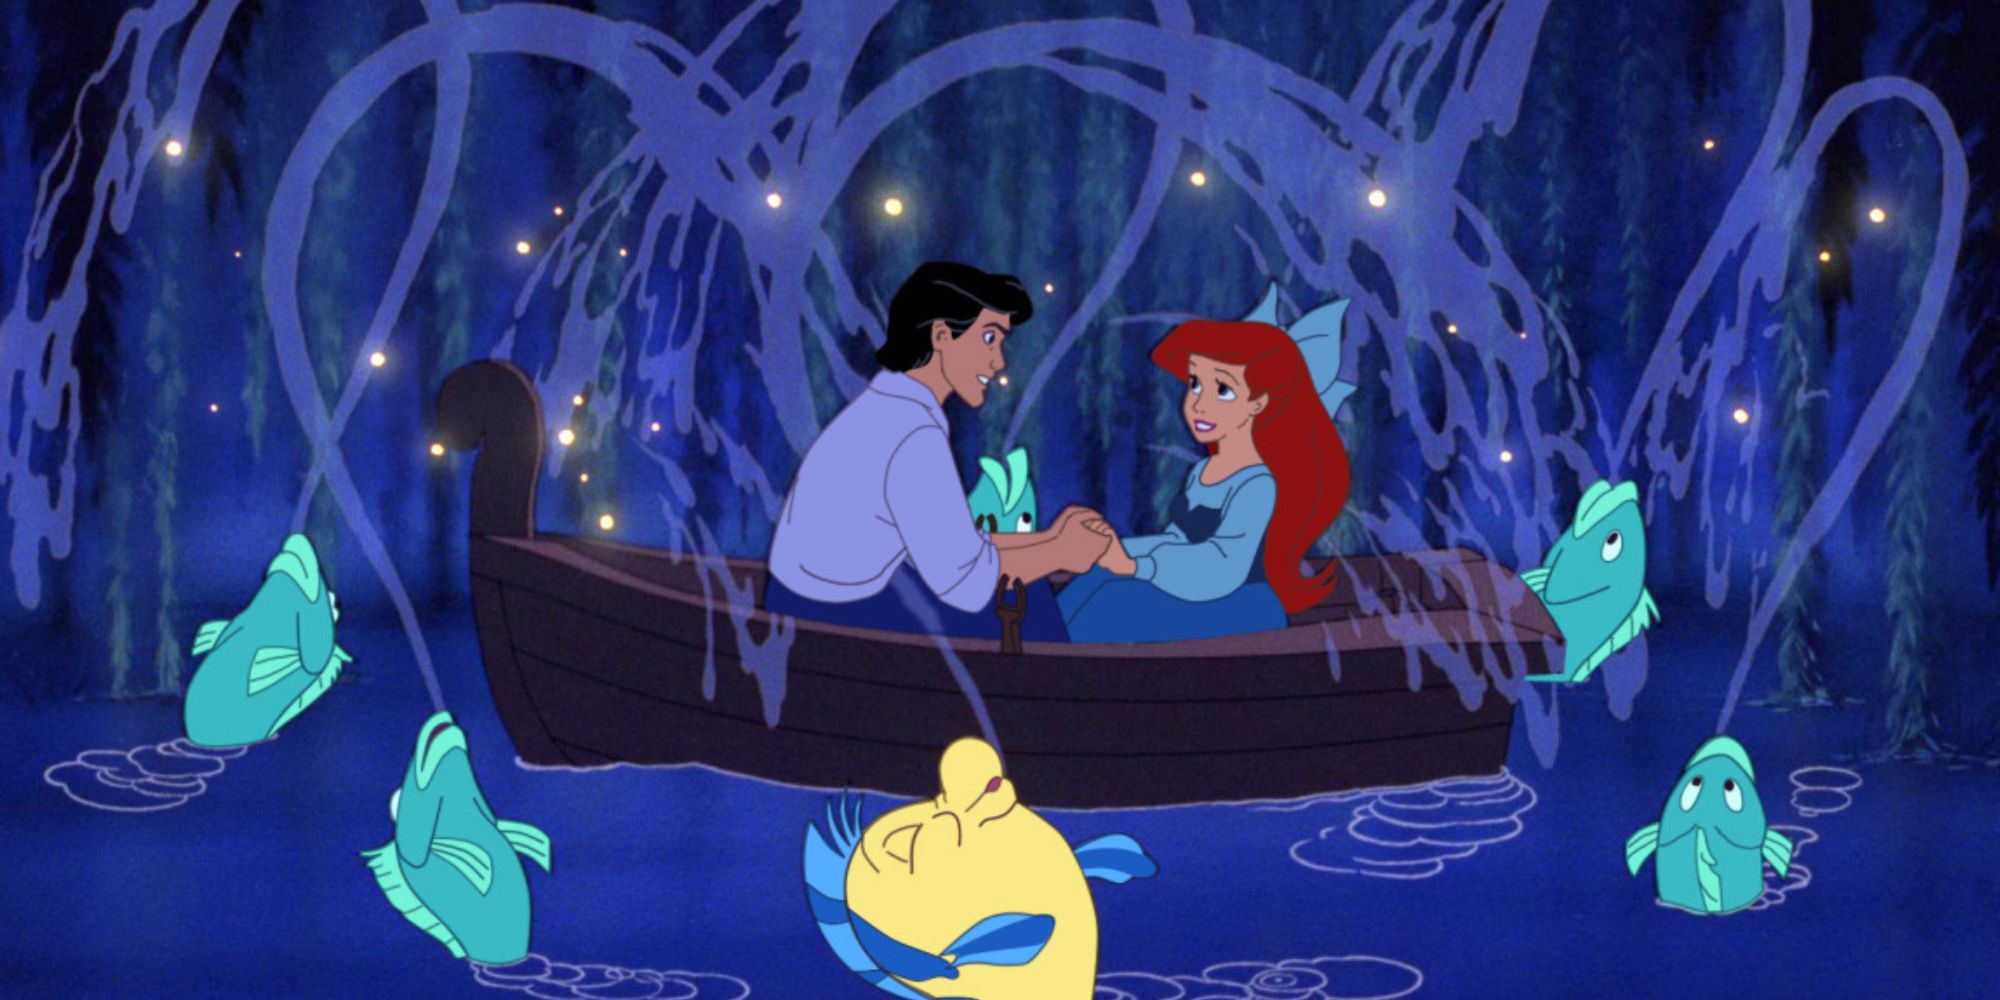 Eric and Ariel holding hands and looking into each other's eyes in a boat during the Kiss the Girl scene in 1989 The Little Mermaid